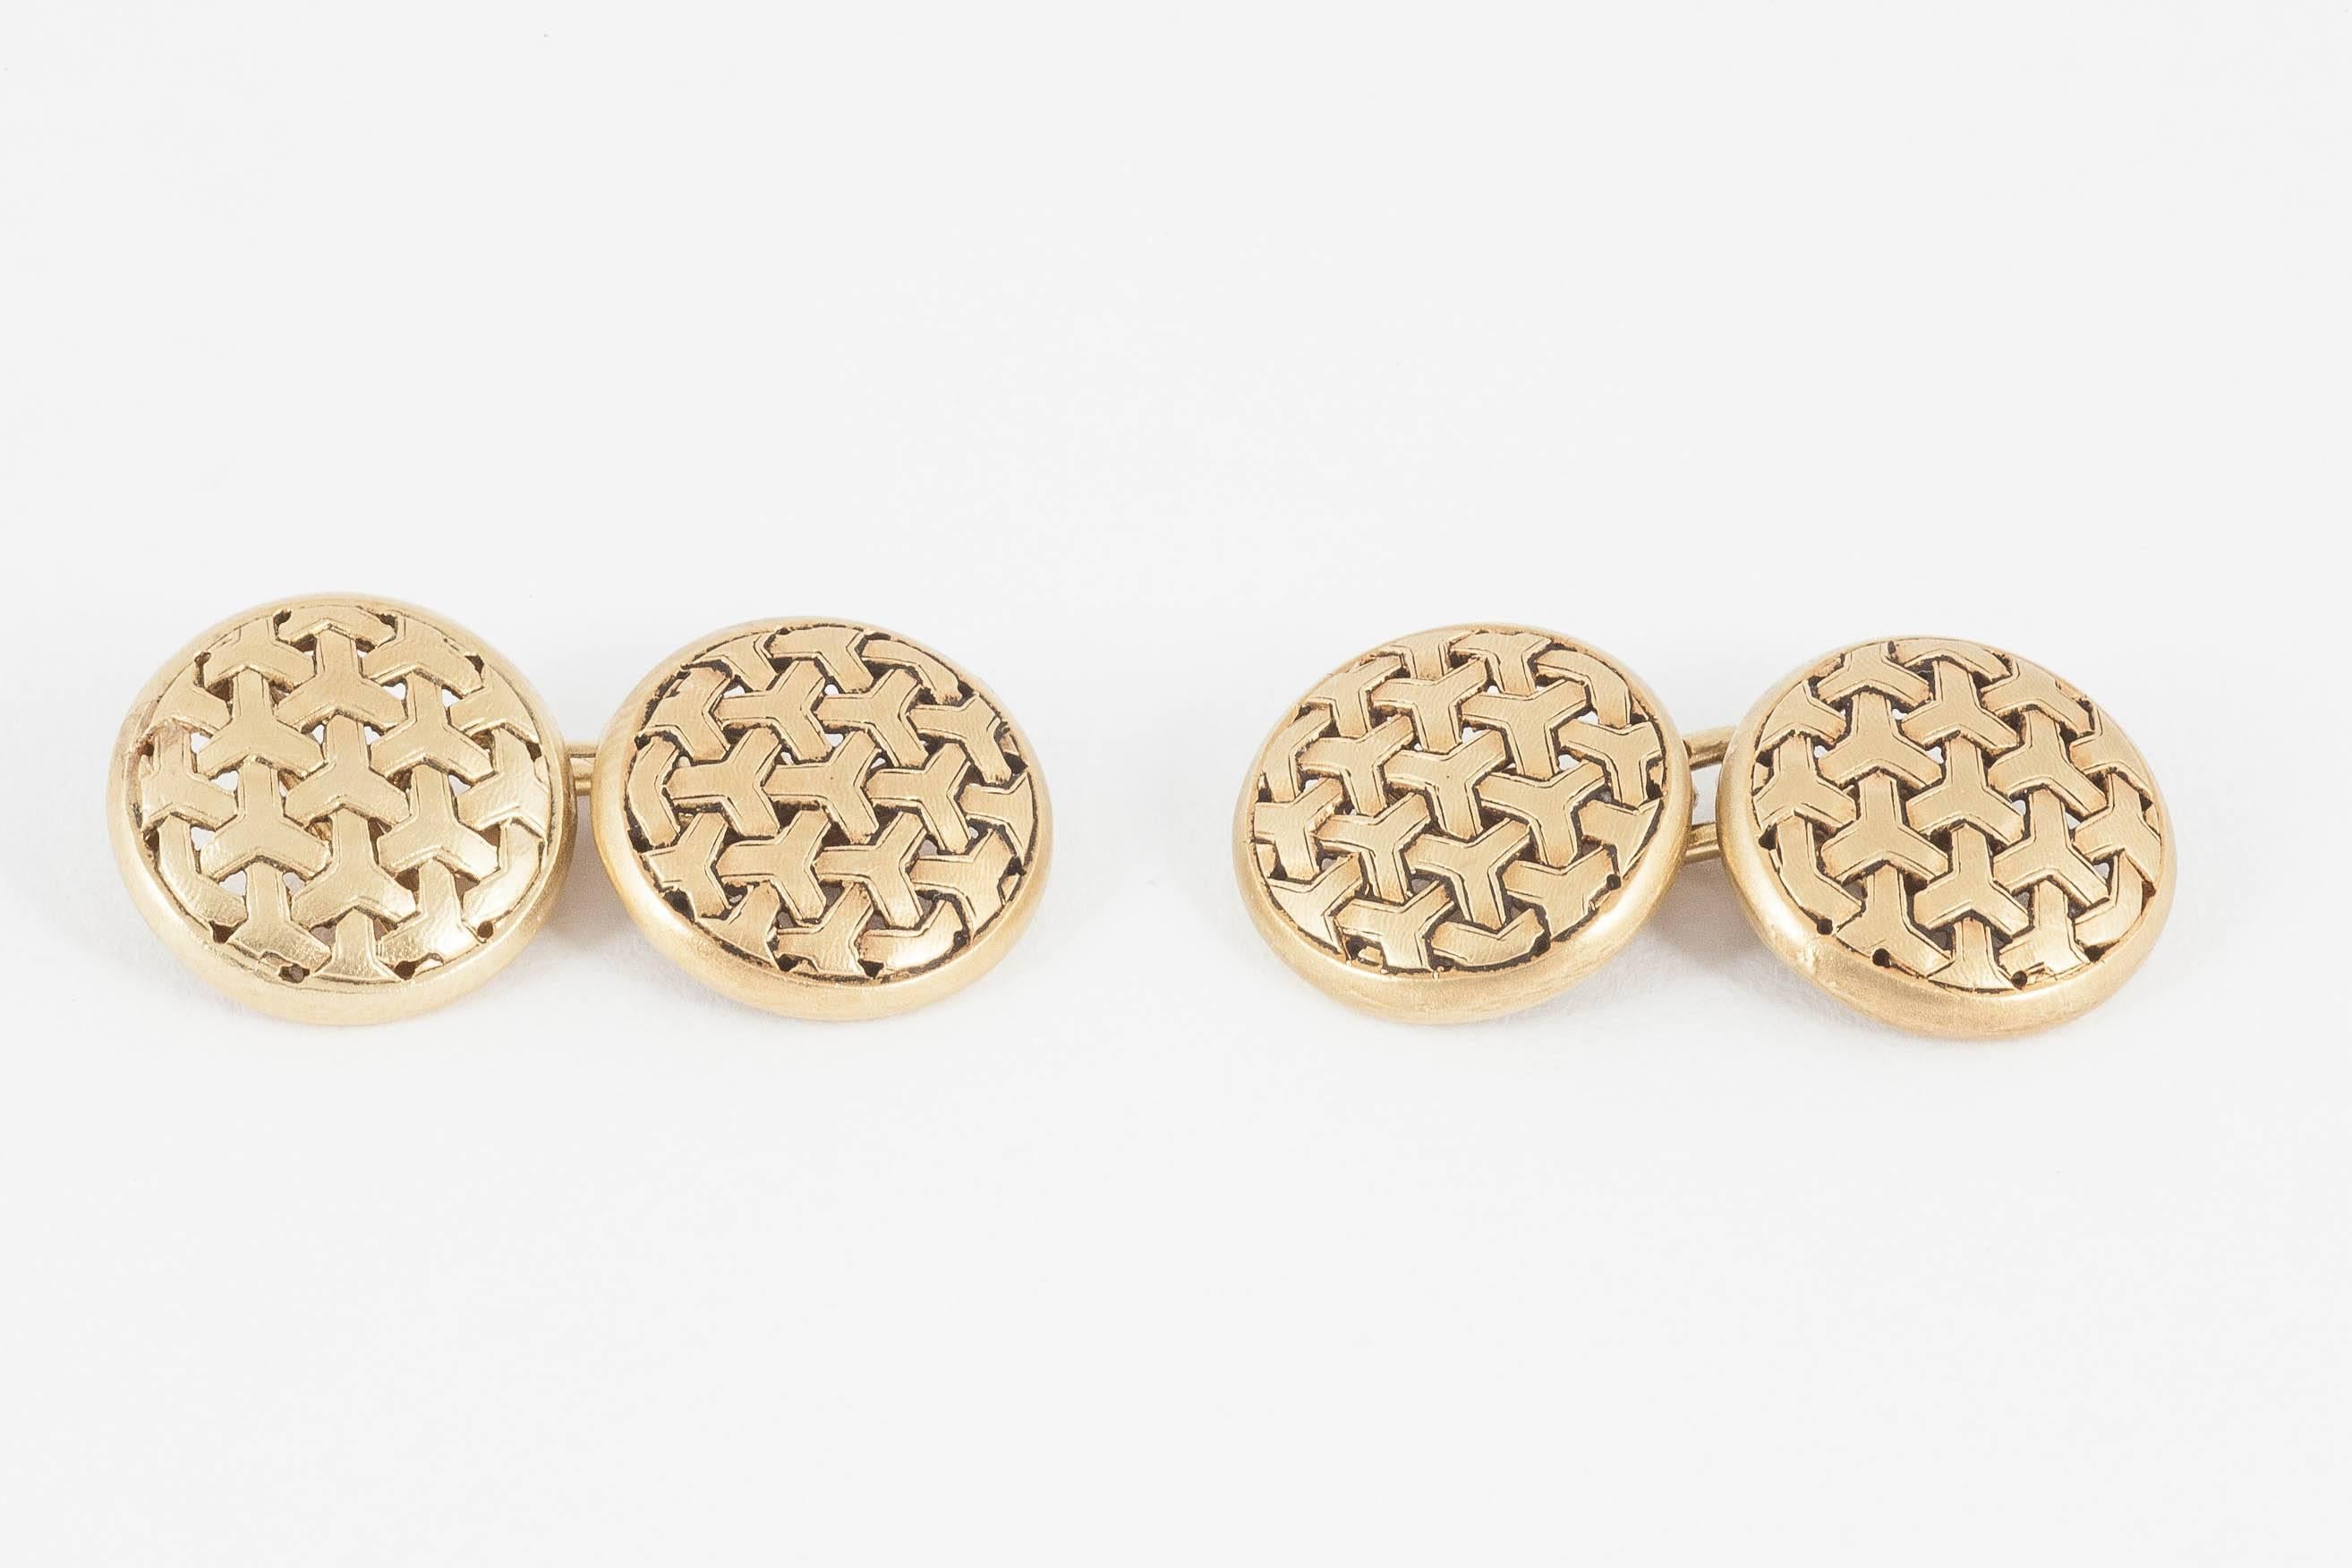 Pair of fine coloured,double sided 18ct gold cufflinks of a honeycomb design,in a soft coloured patina.French marked c,1890